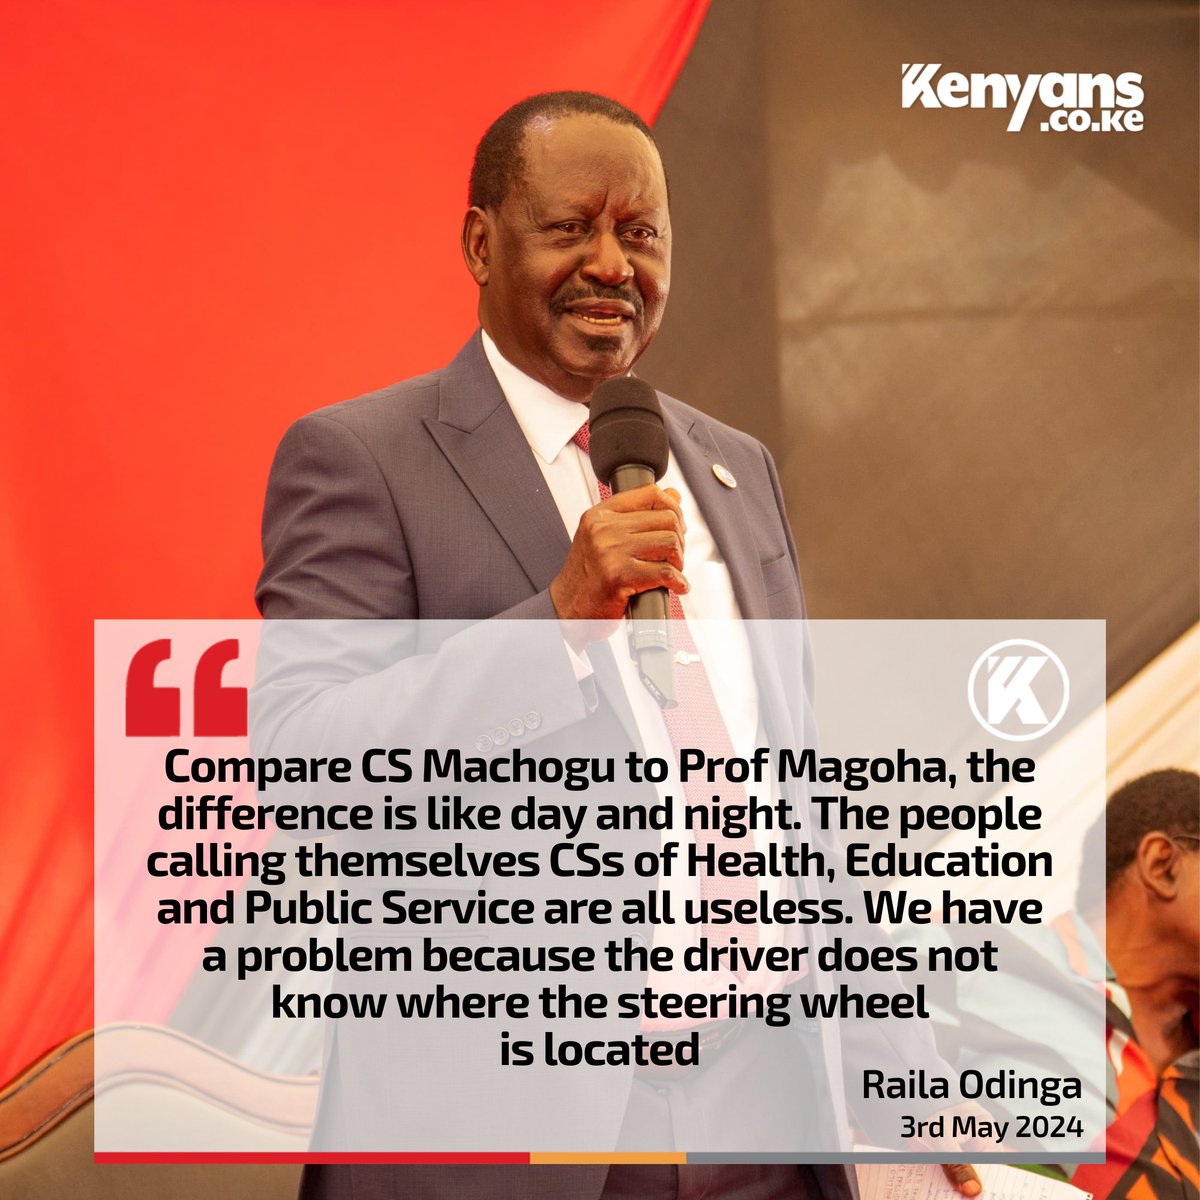 The people calling themselves CSs of Health, Education and Public Service are all useless - Raila Odinga